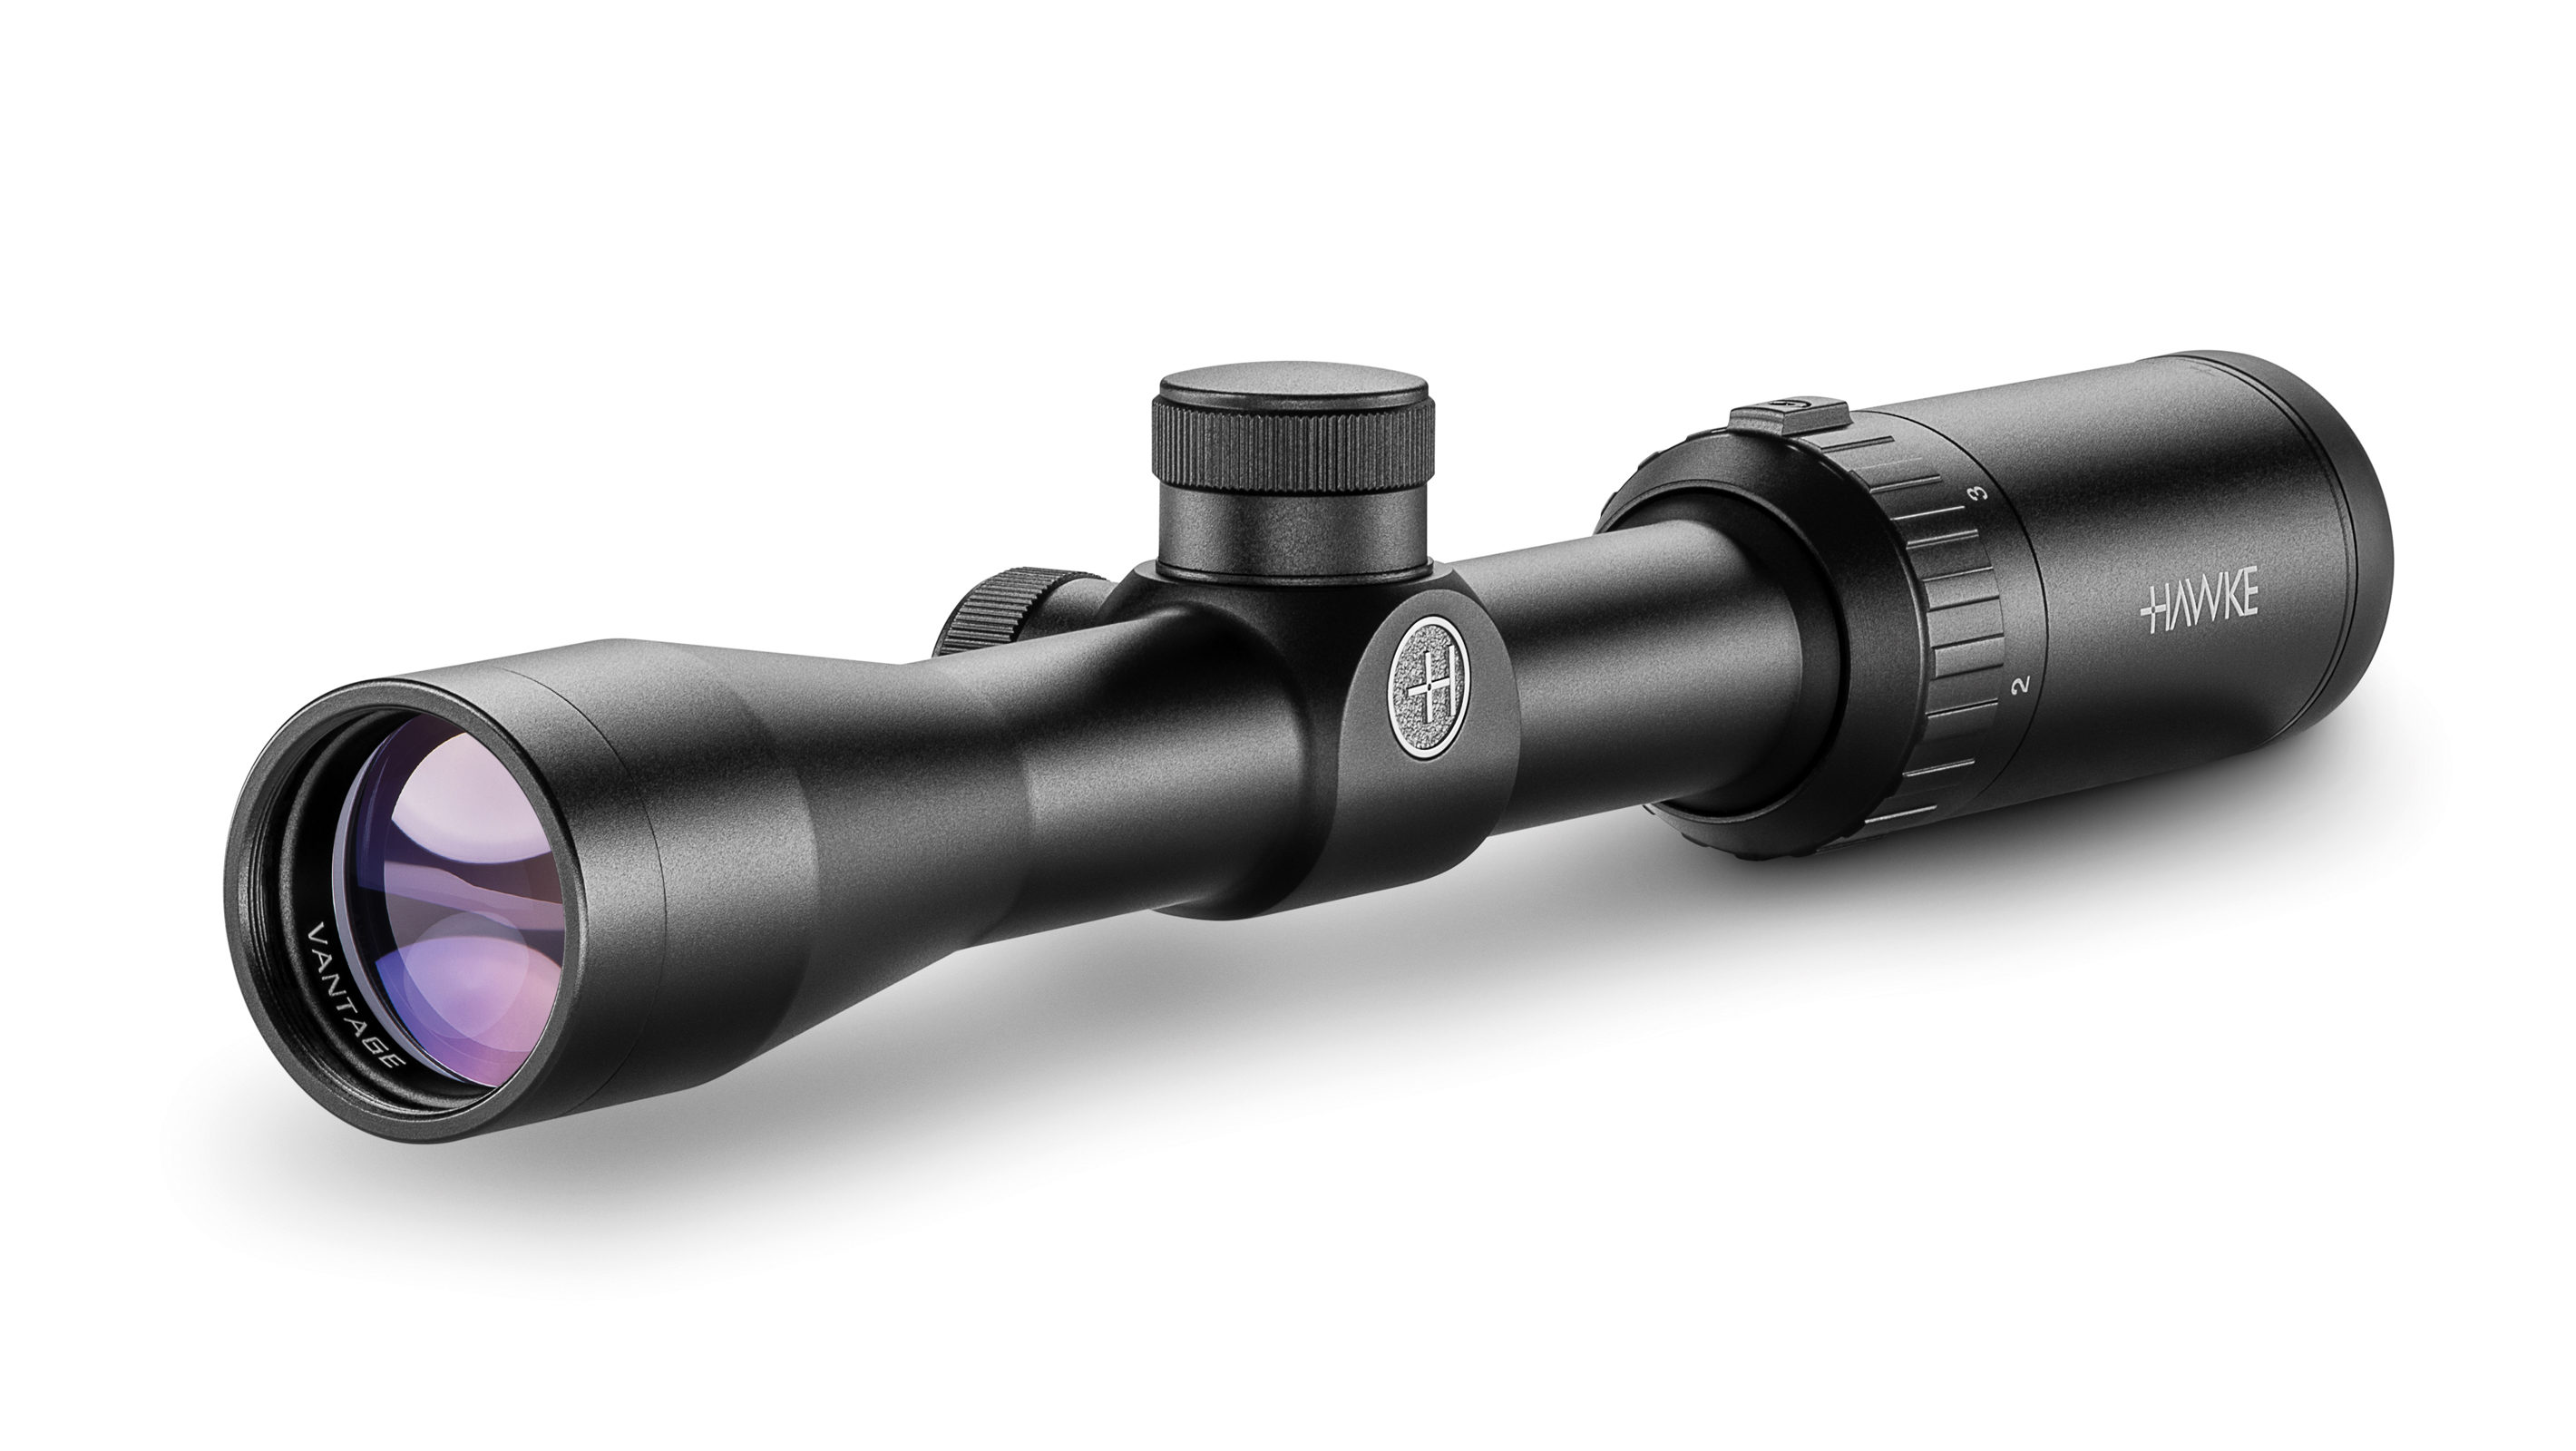 Objective End View Of The Hawke Vantage 2-7x32 30/30 Duplex Rifle Scope